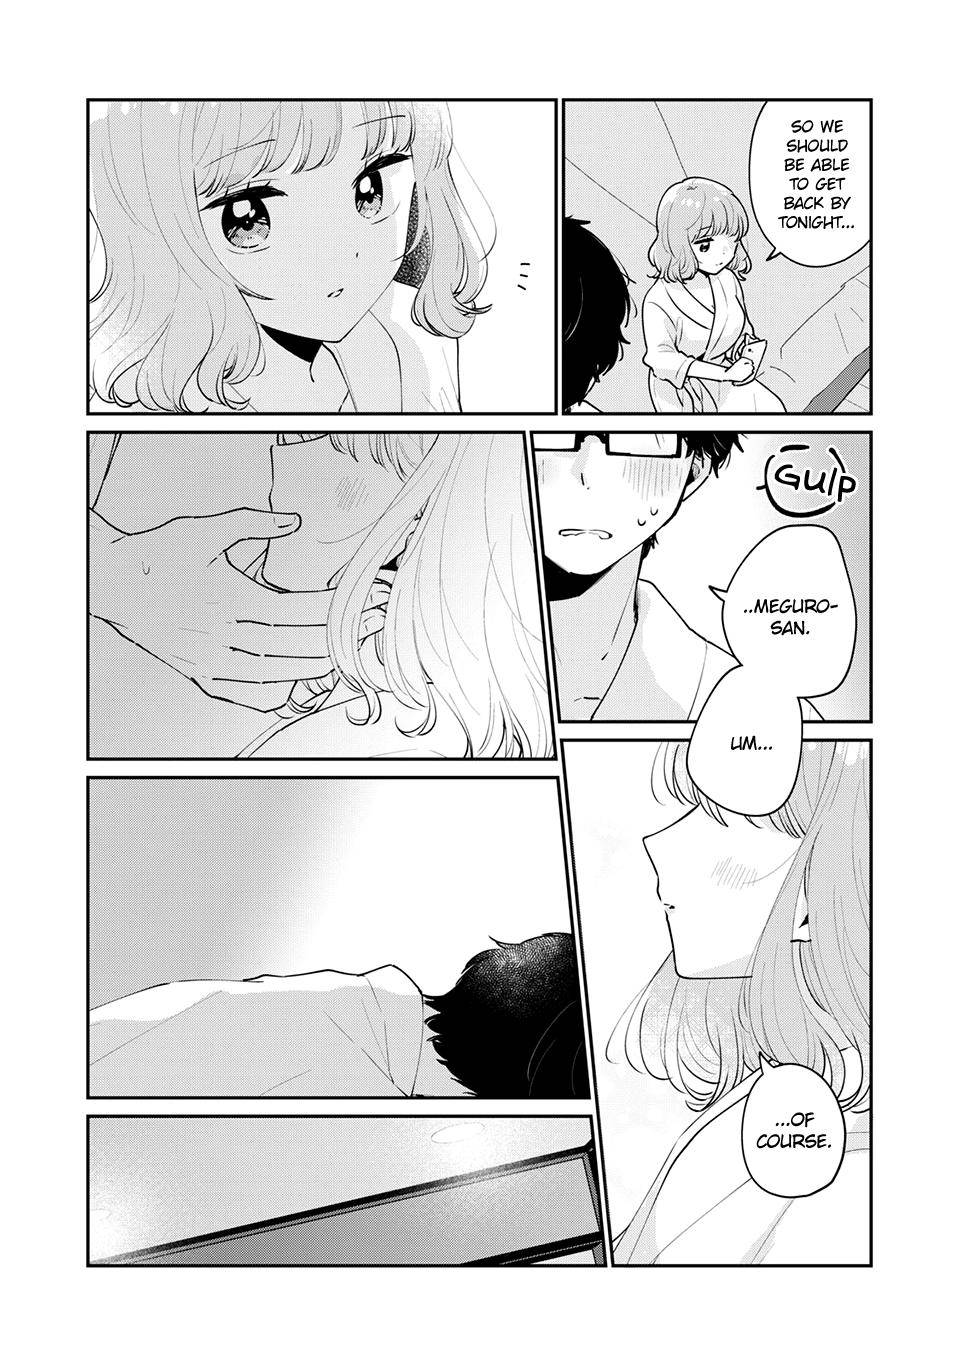 It's Not Meguro-san's First Time chapter 50 page 15